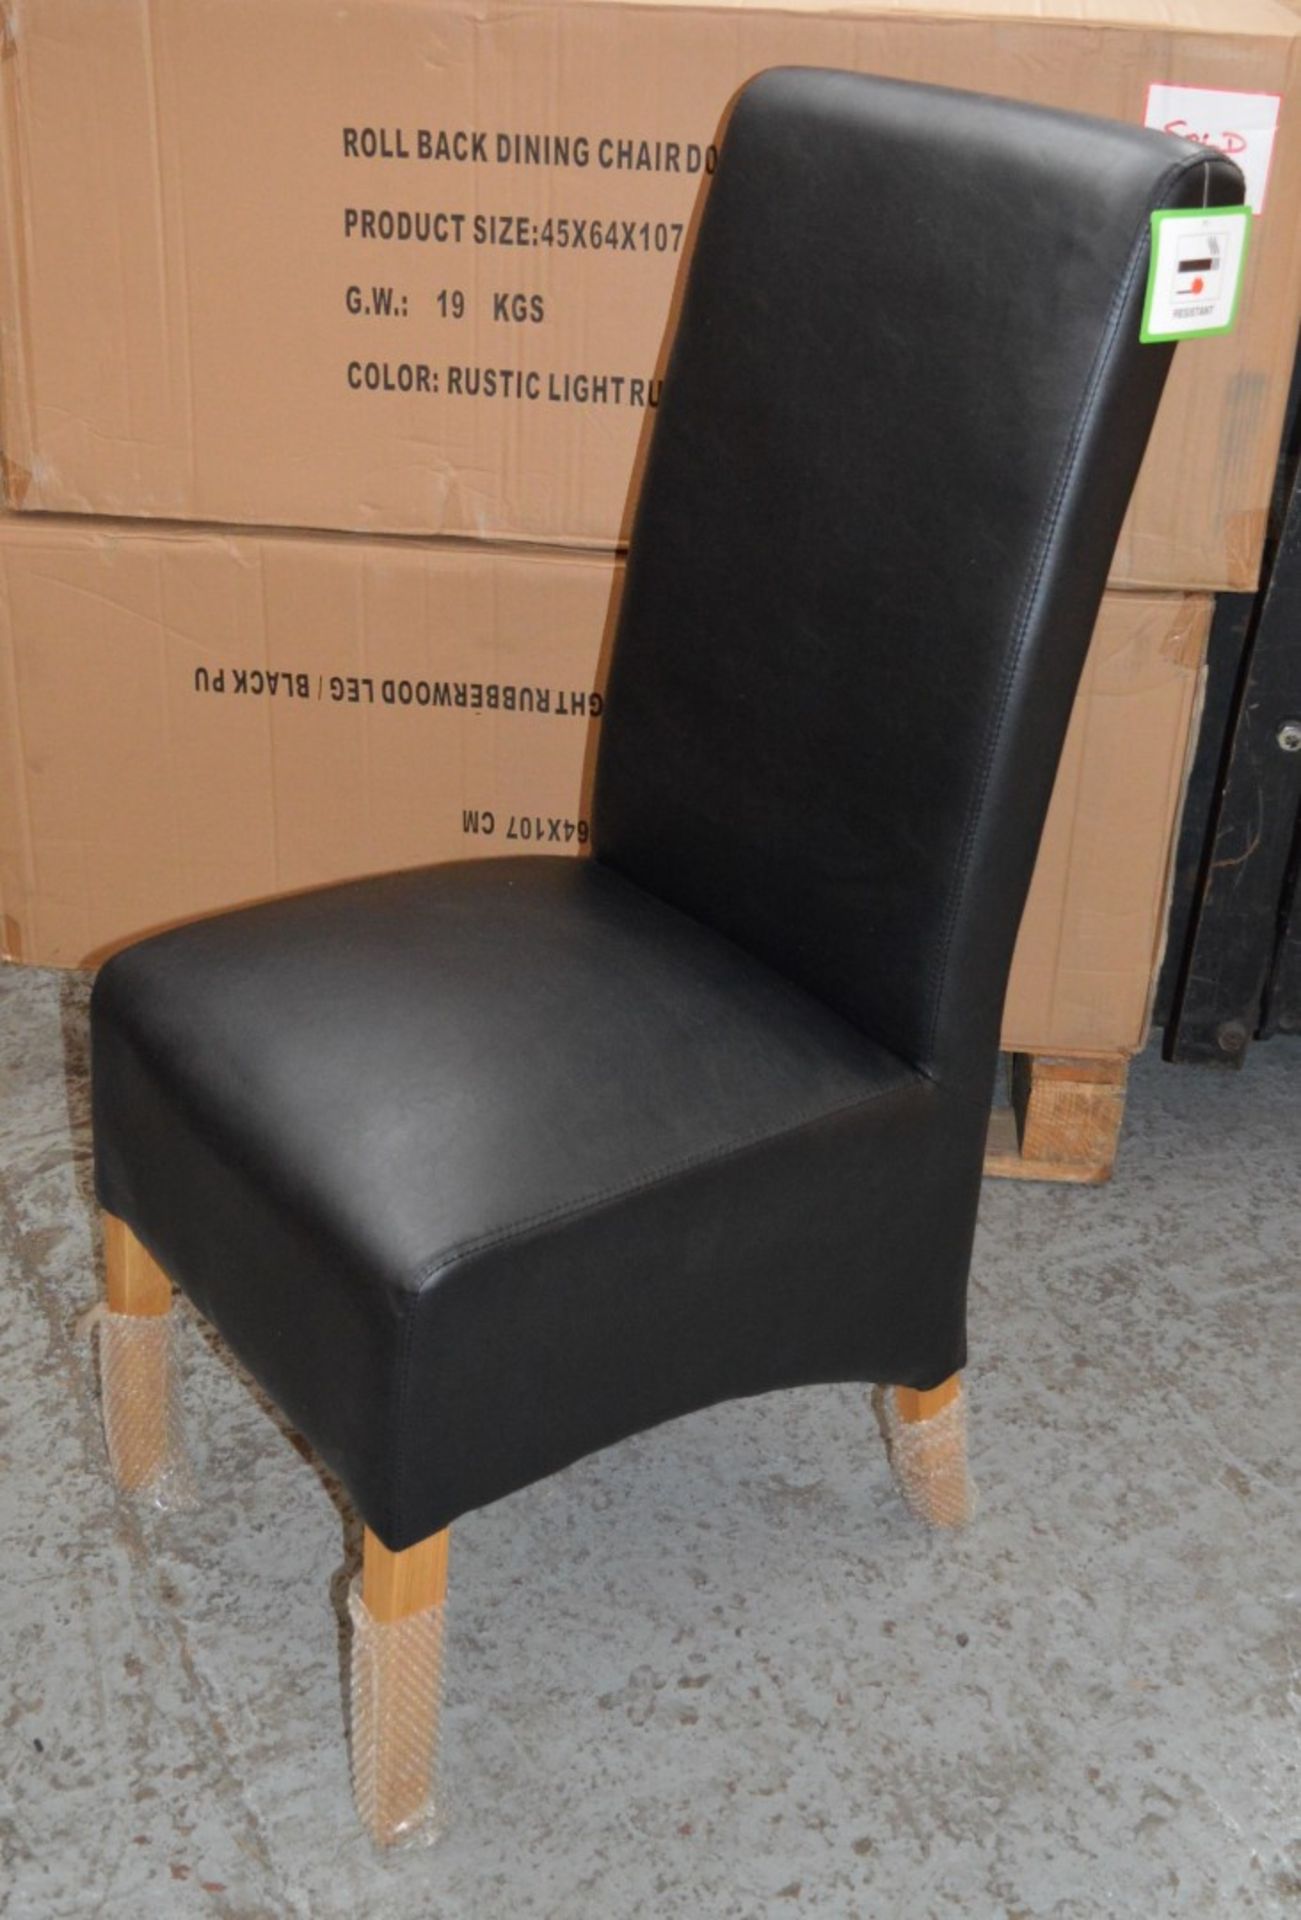 2 x Black Faux Leather Dining Chairs - Seating Dimensions: W44 x D60 x Height 106cm, Seat Height - Image 5 of 7